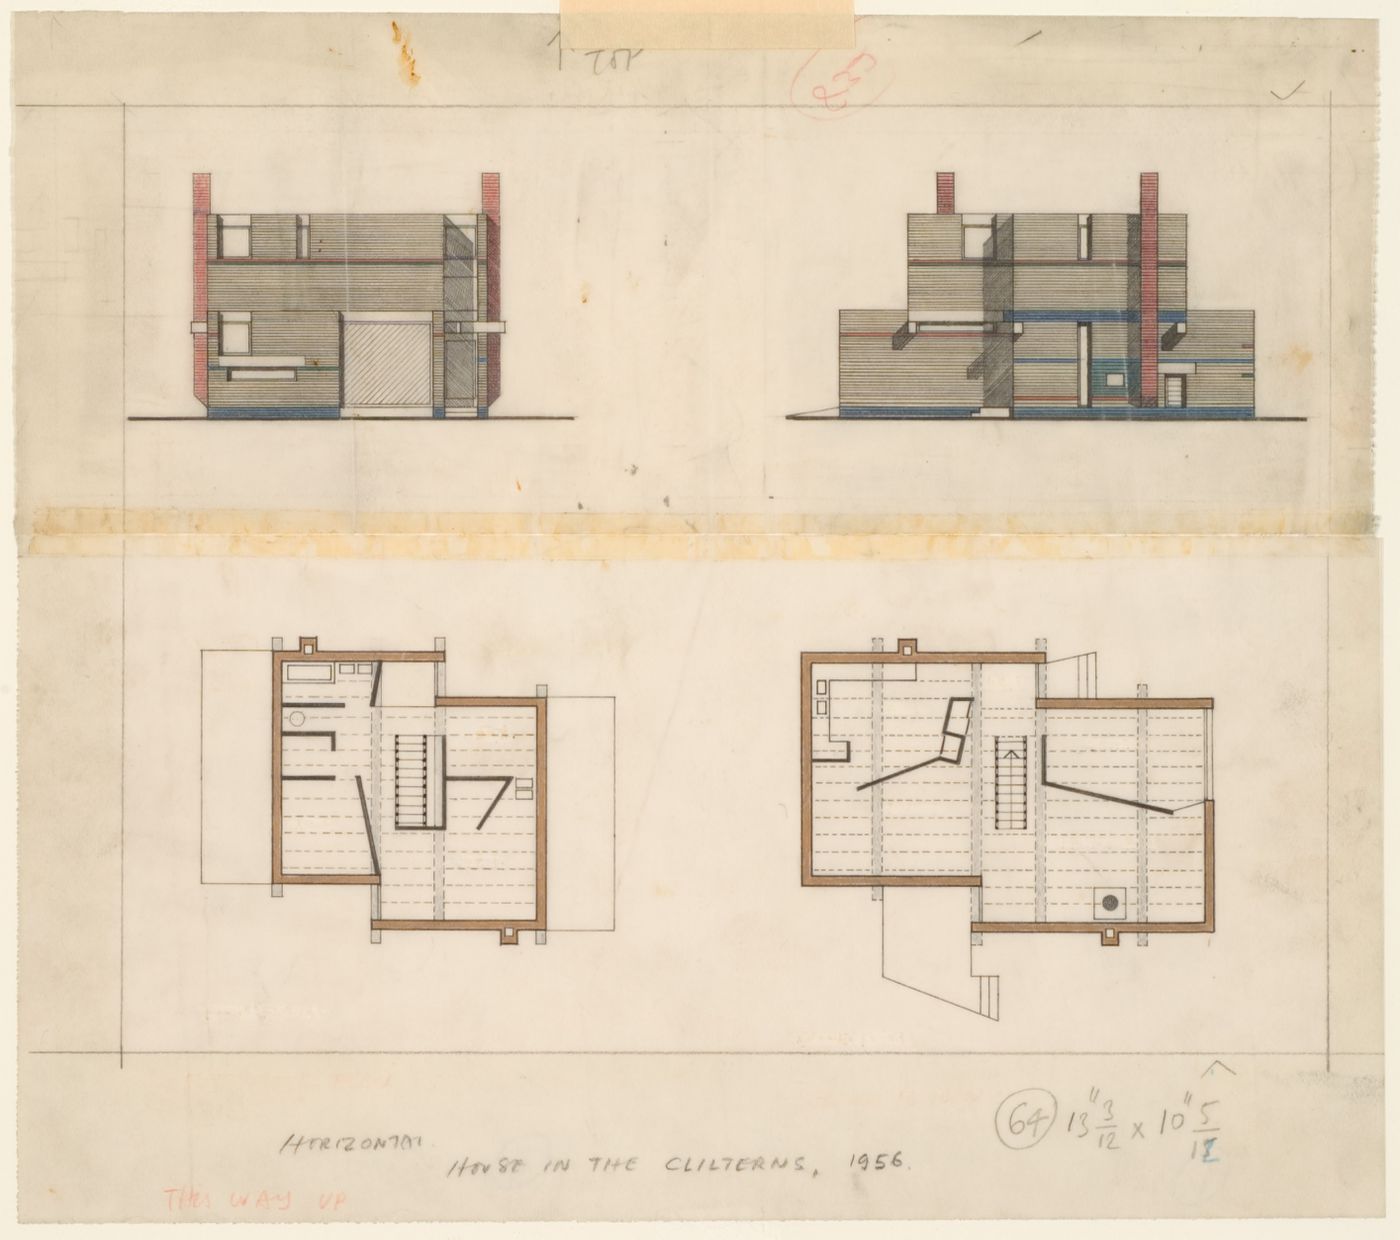 House in Chiltern Hills, Buckinghamshire, England: elevations and plans